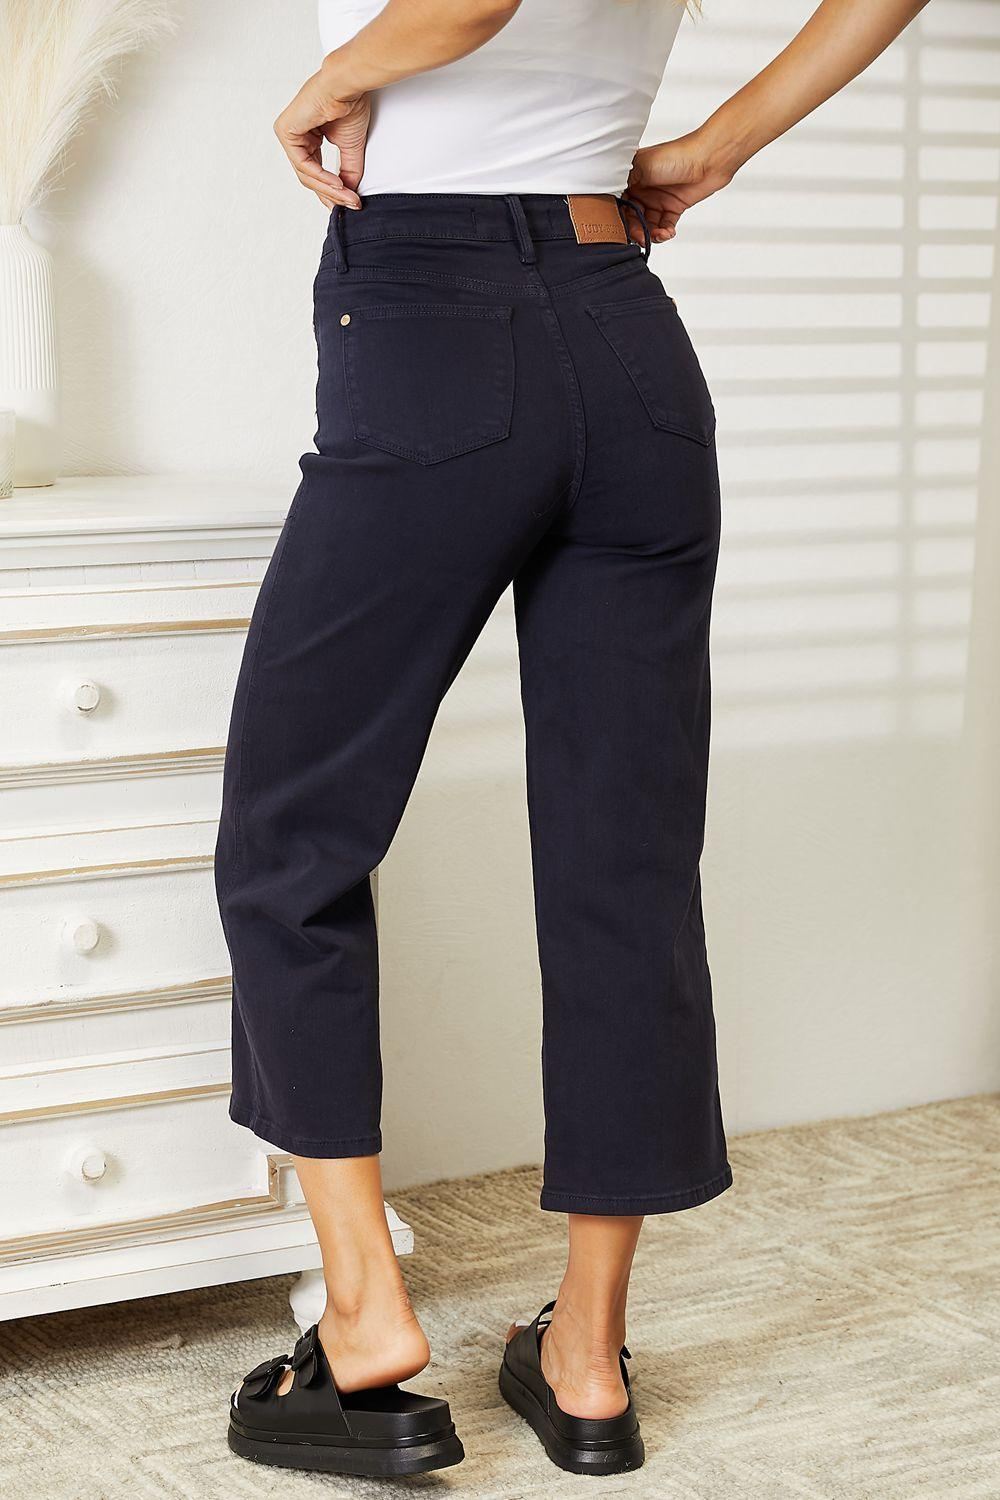 Judy Blue Wide Leg Cropped Jeans - Inspired Eye Boutique